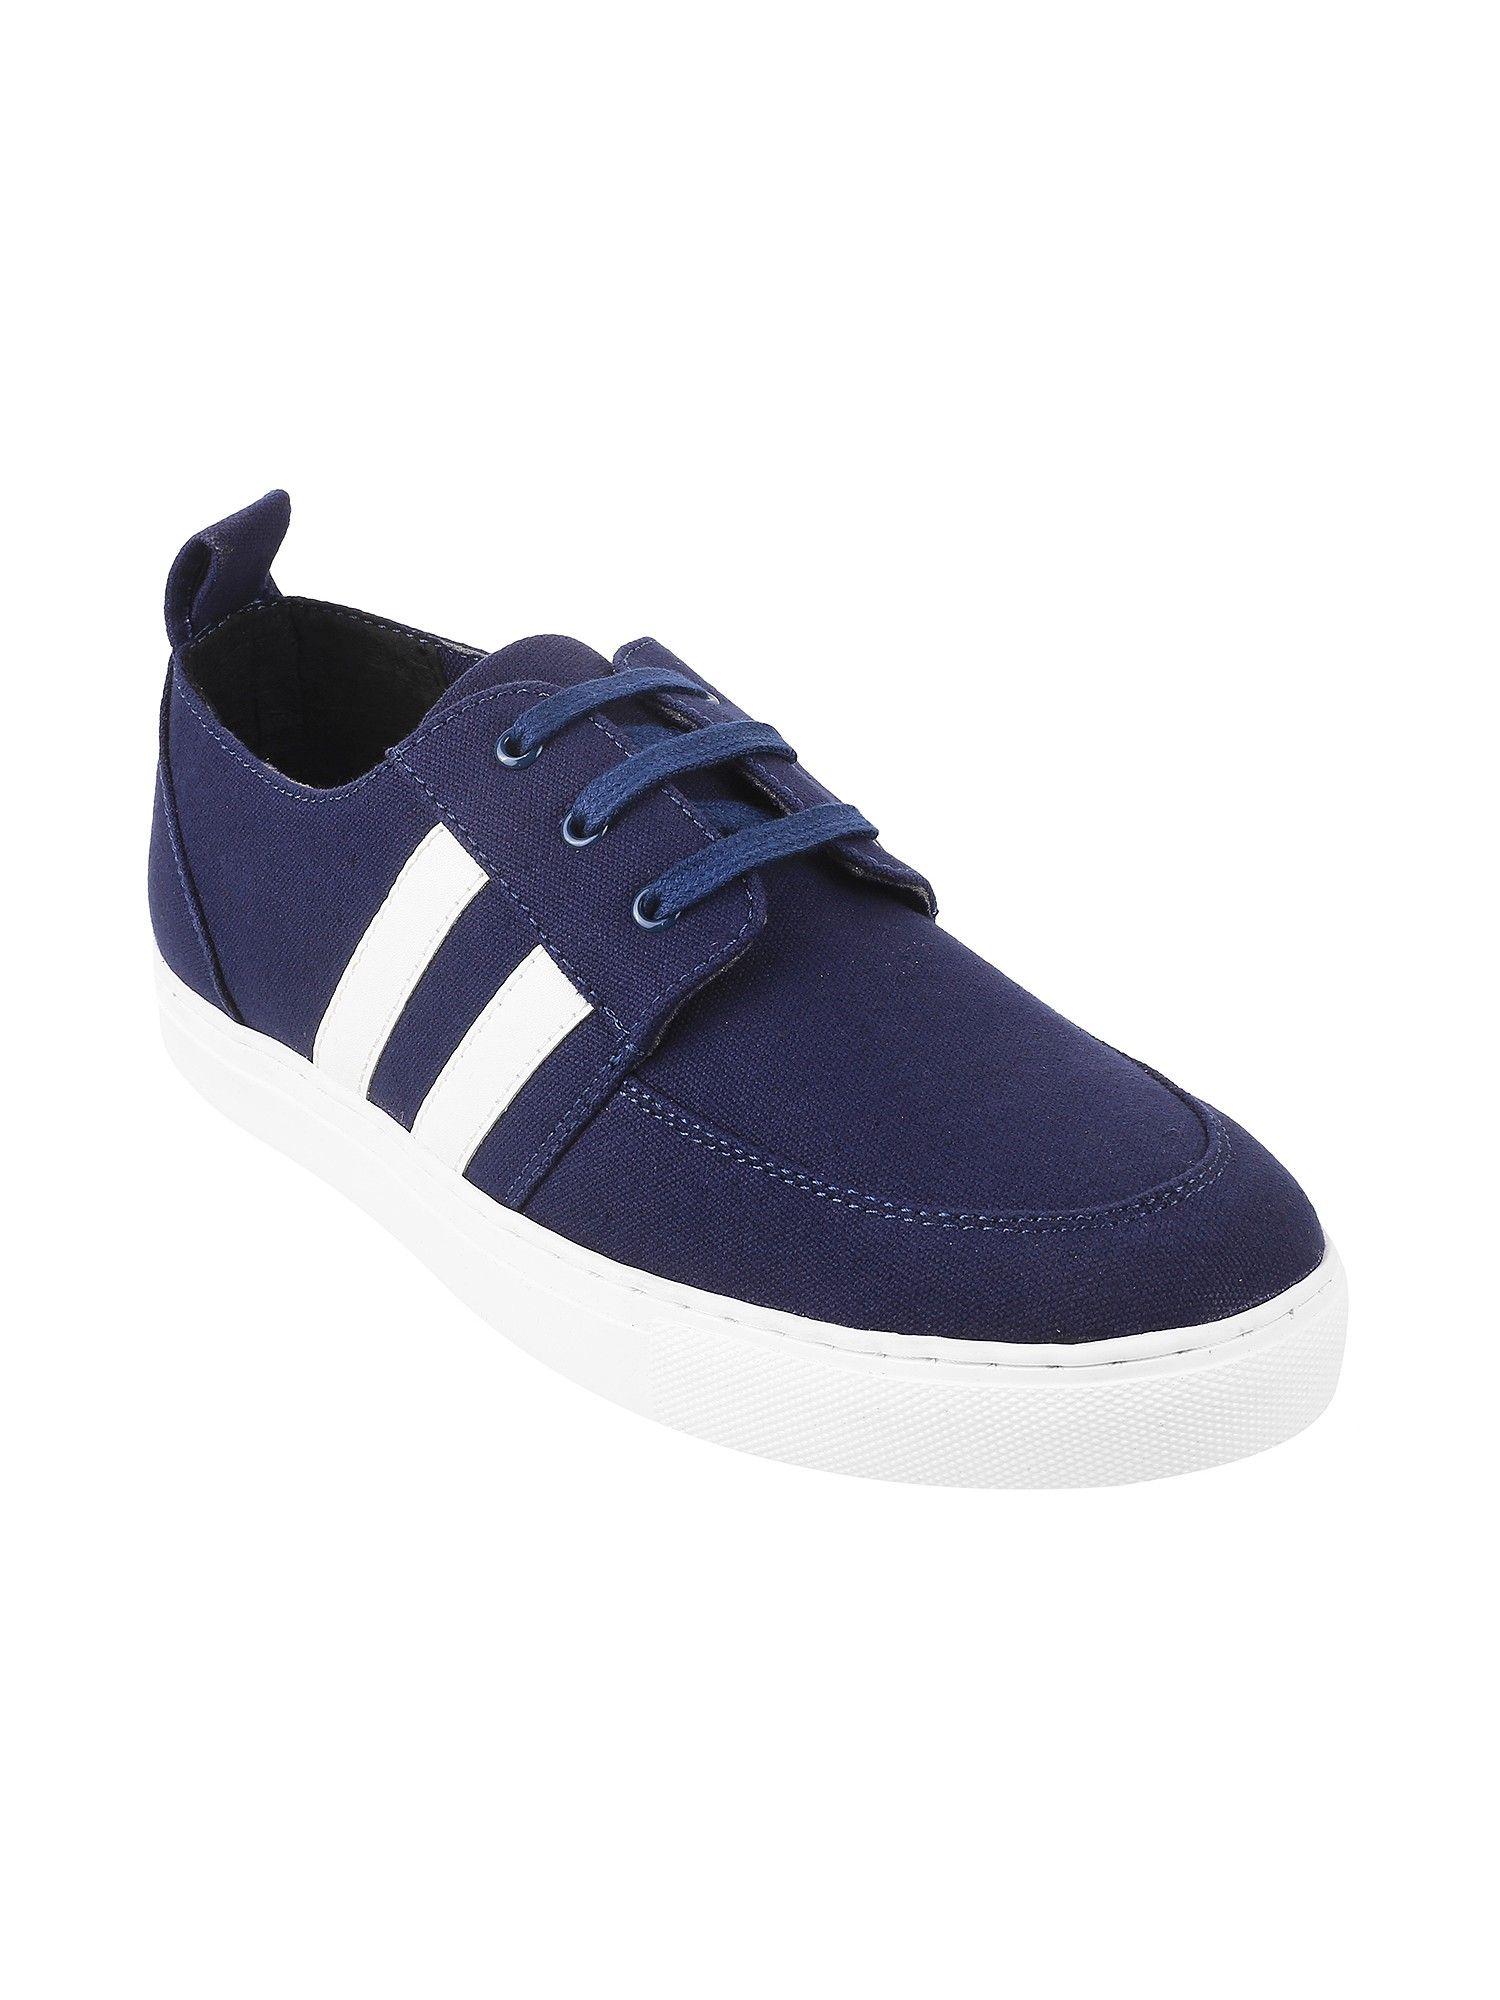 mens navy blue synthetic colorblock sneakers